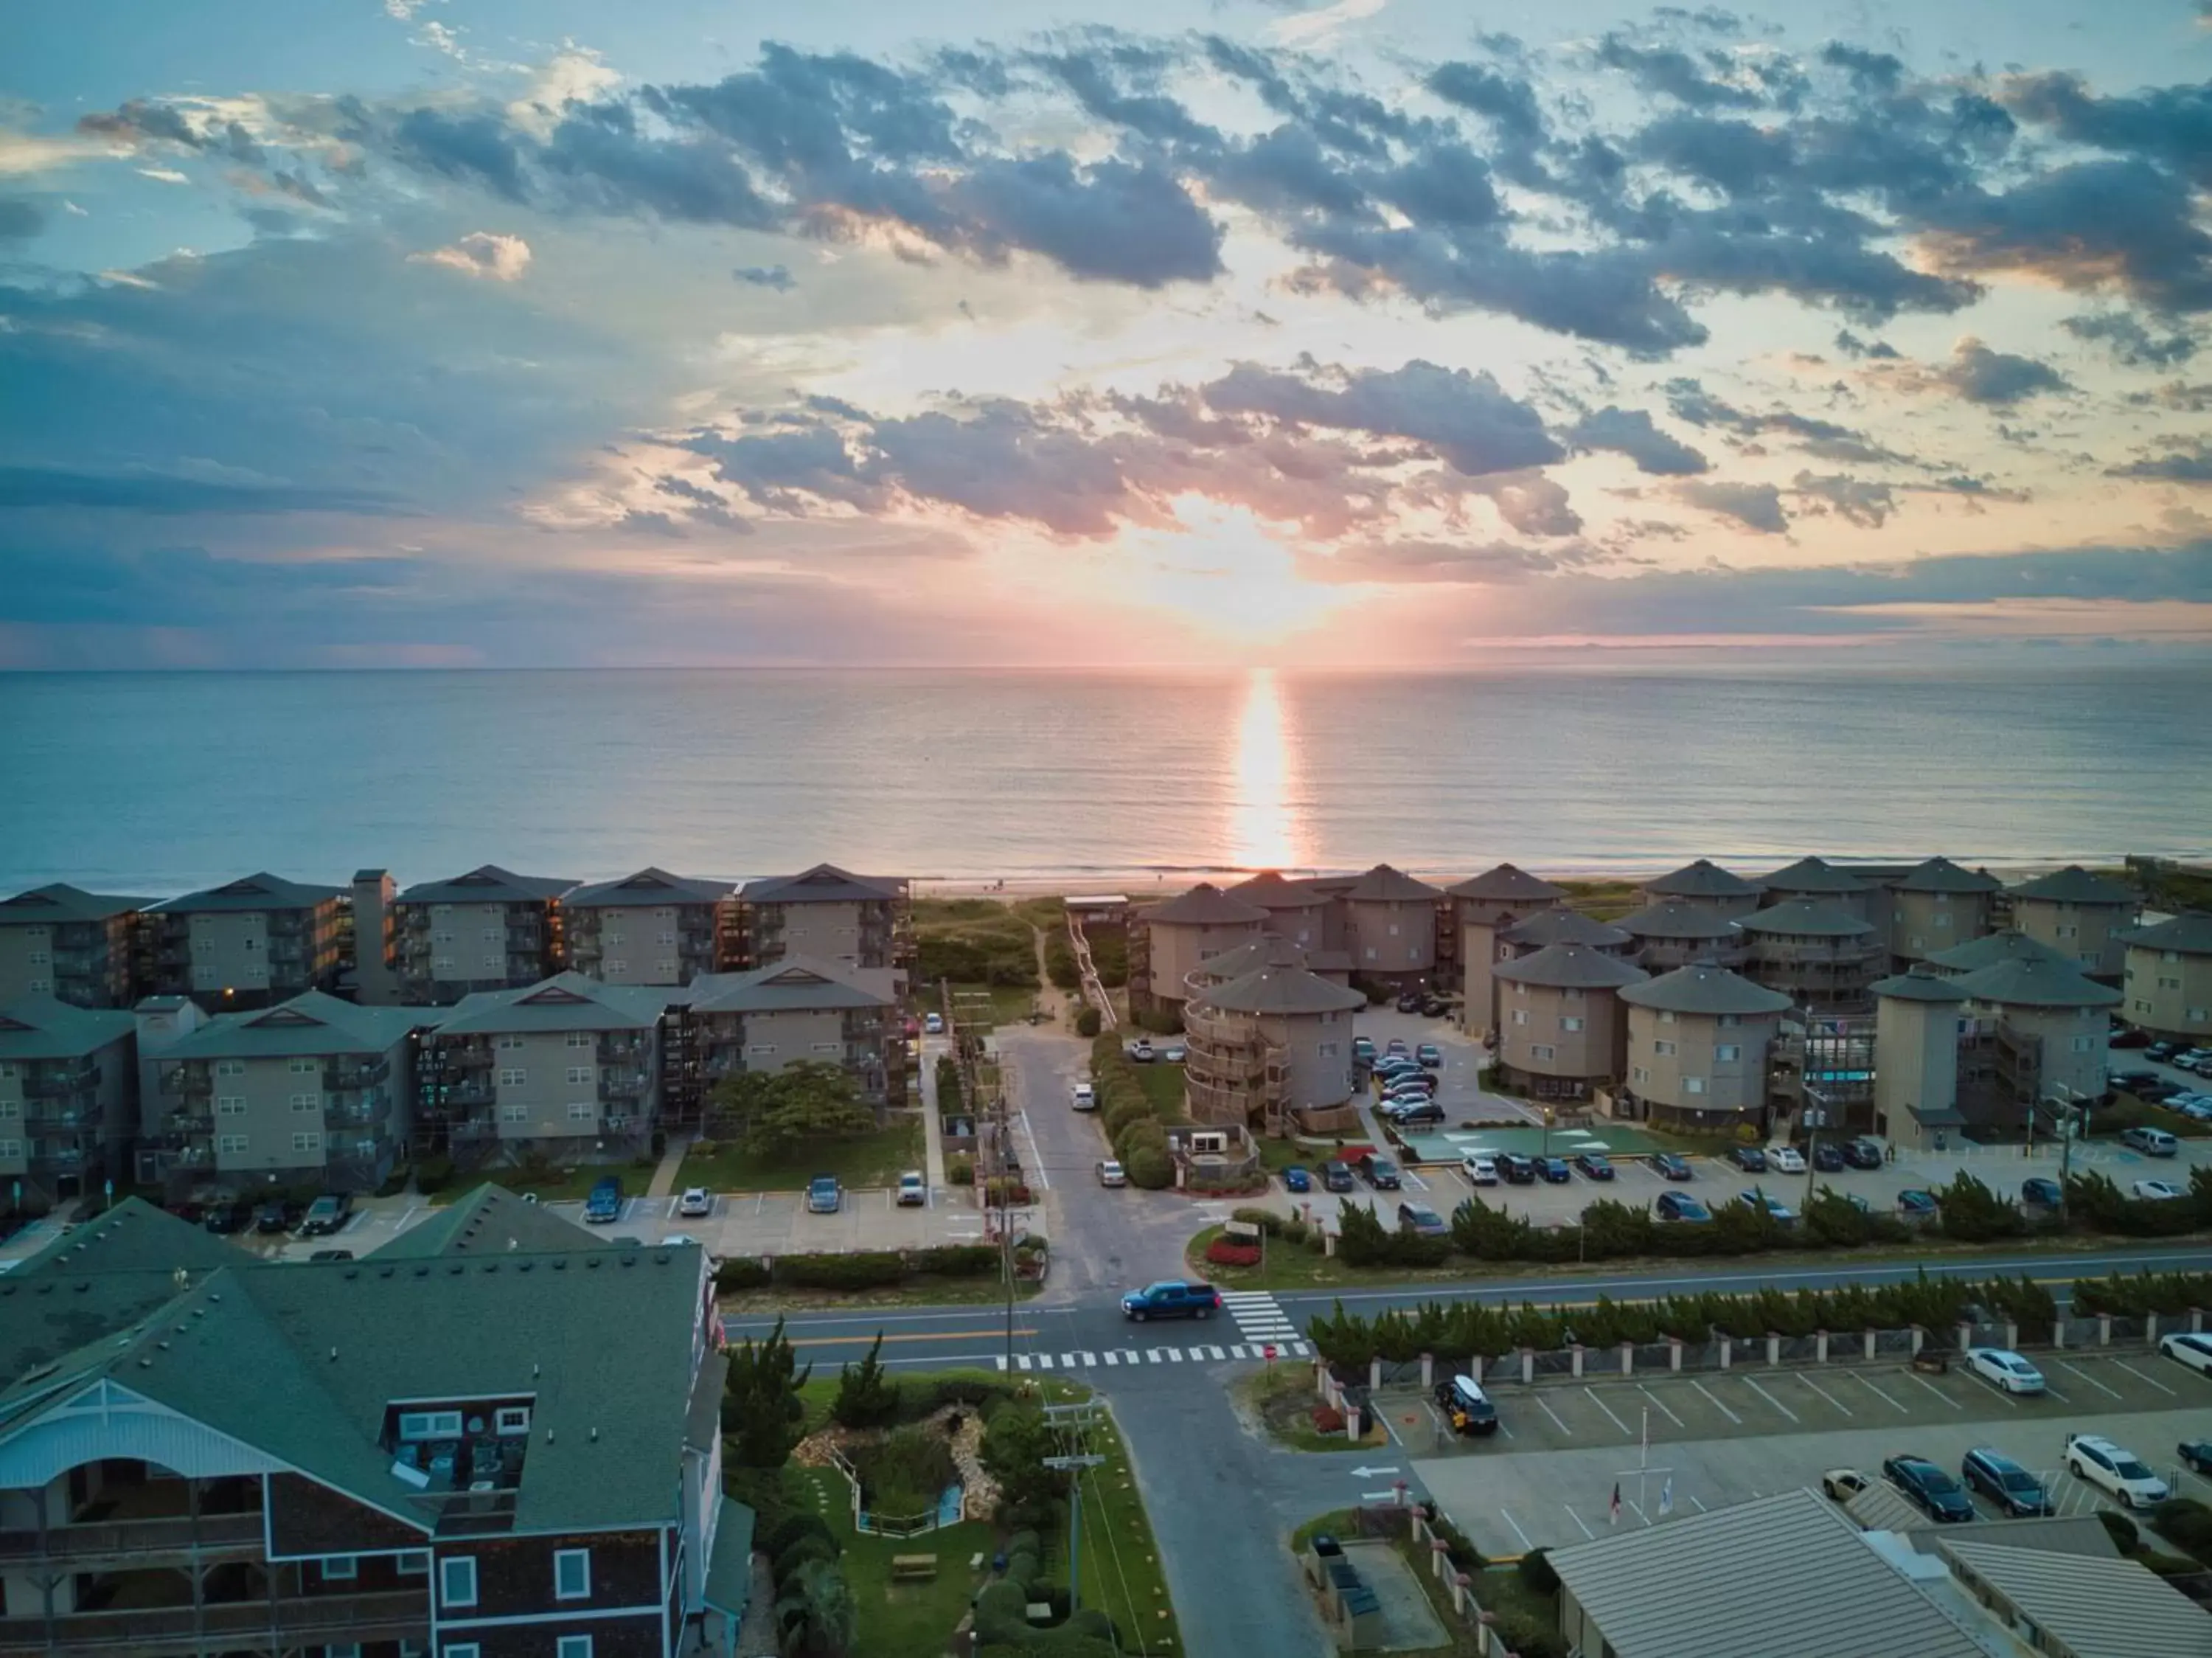 Bird's eye view in Outer Banks Beach Club